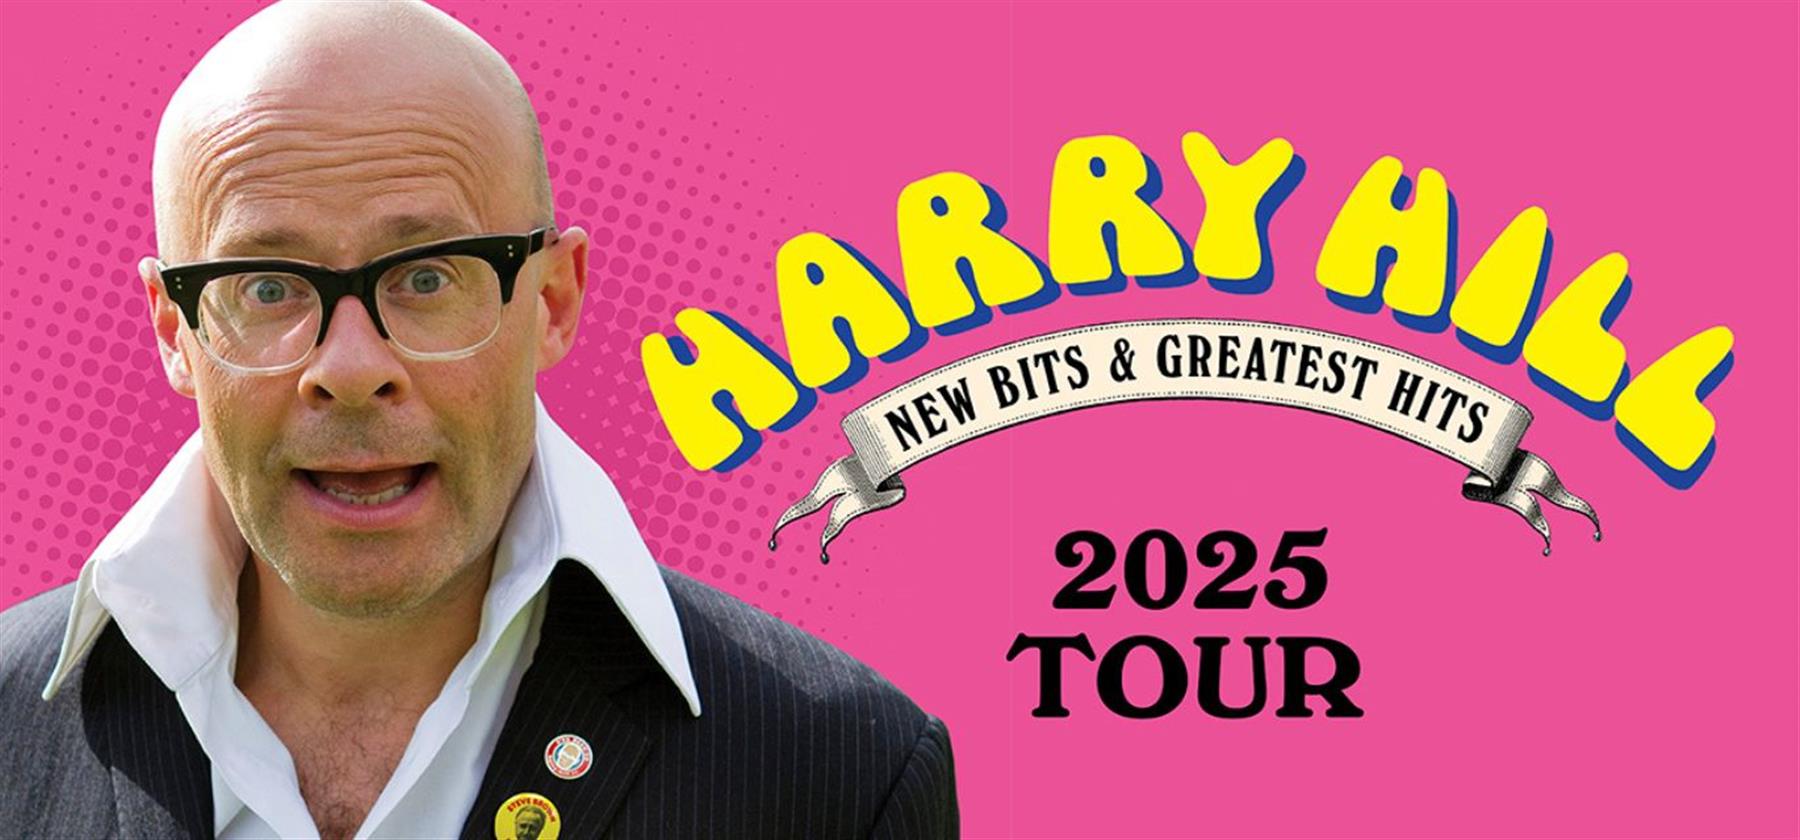 Harry Hill: New Bits and Greatest Hits